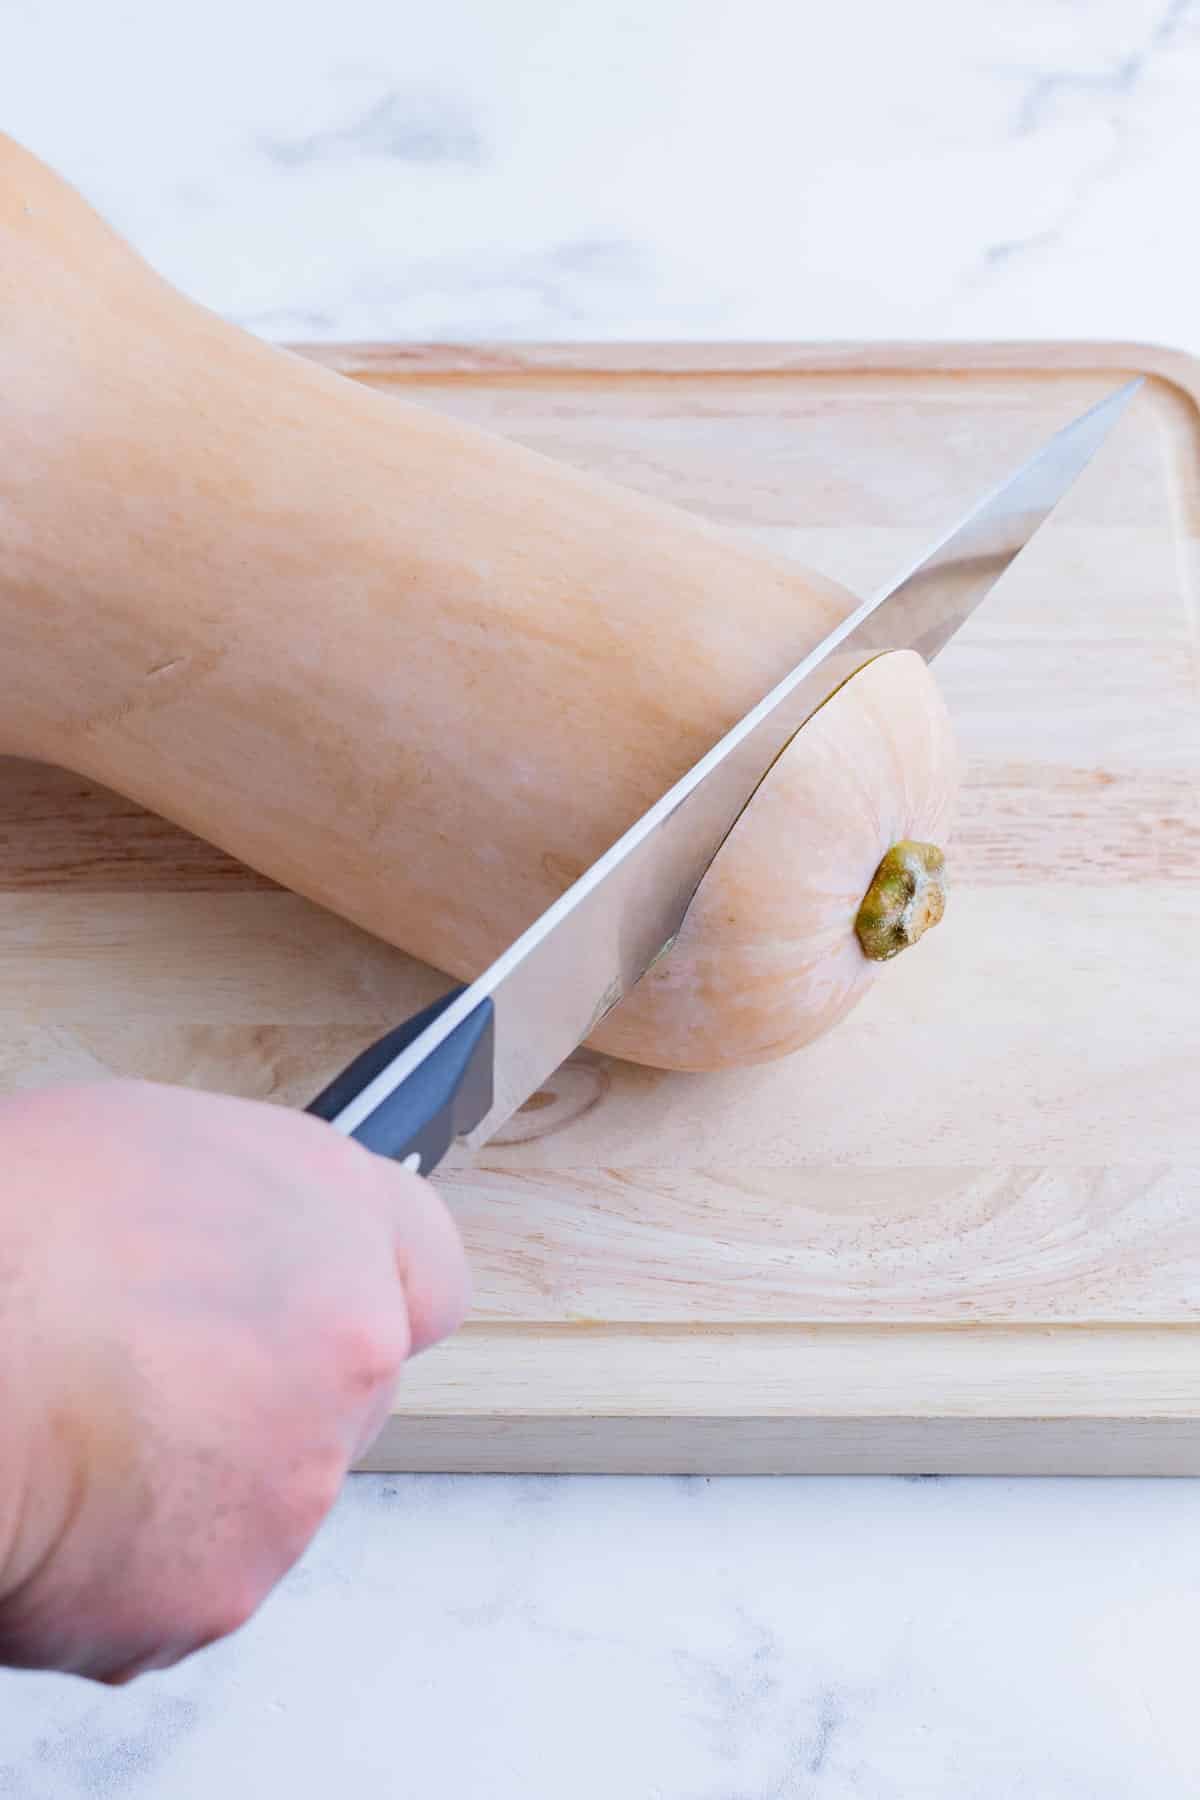 A knife trims the end of a butternut squash off.